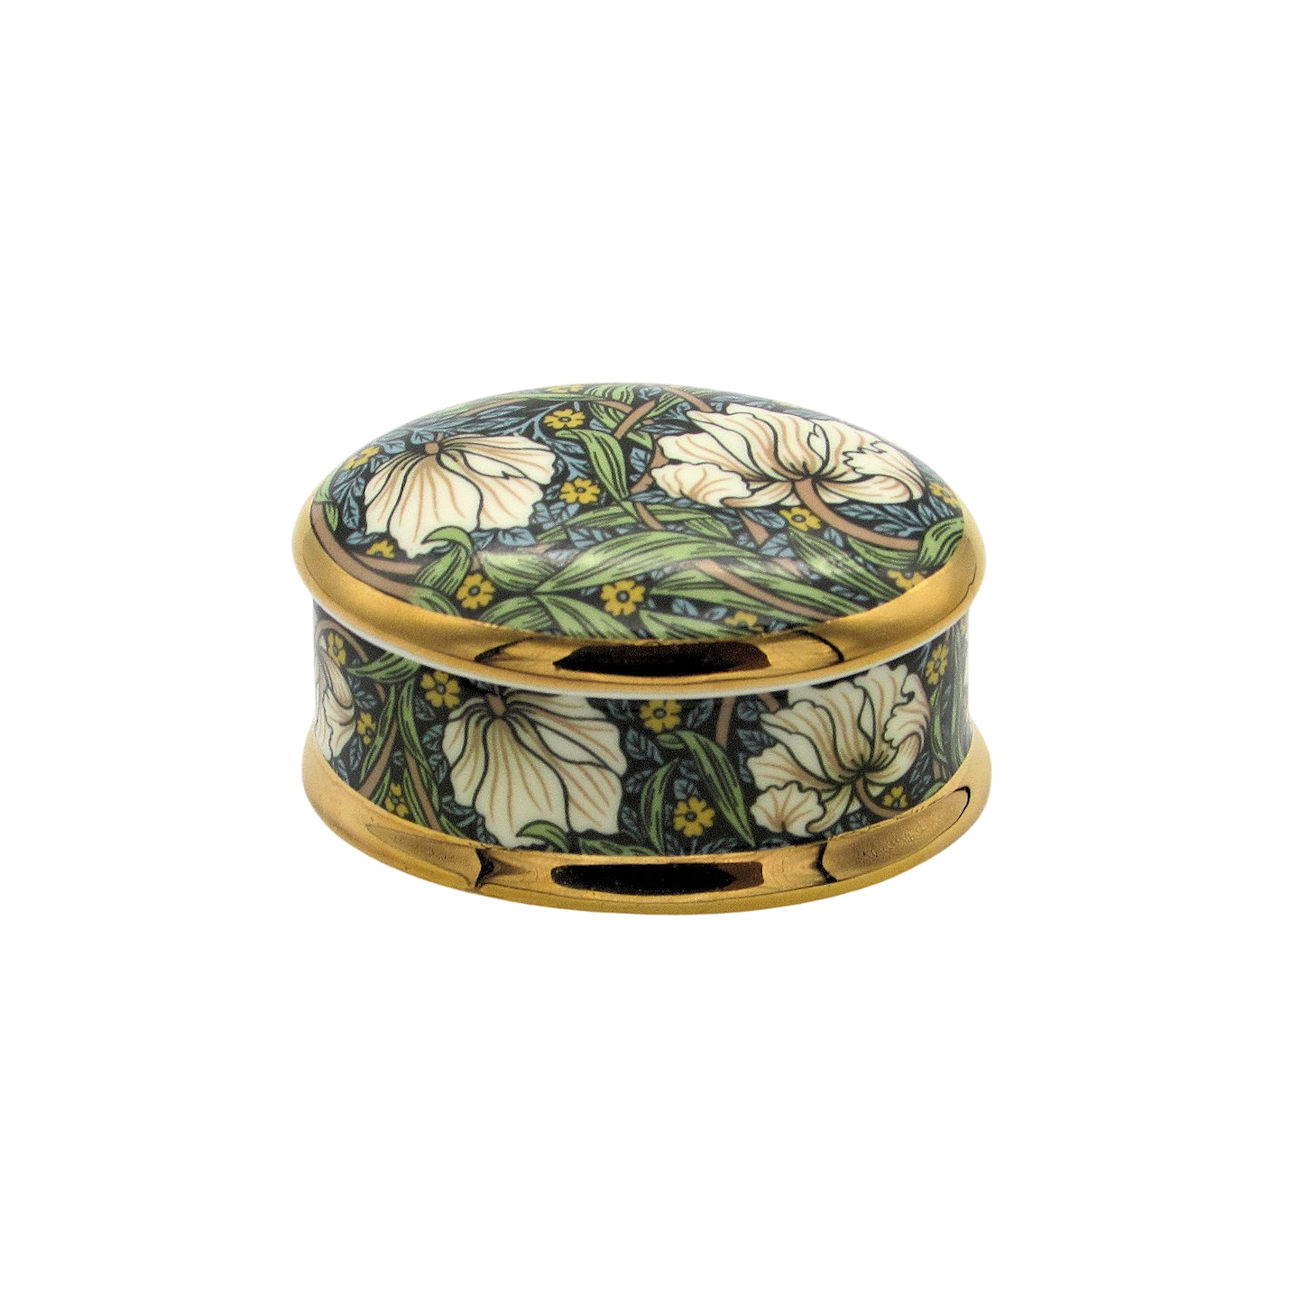 William Morris Snakeshead Handmade Box With Removable Tray 